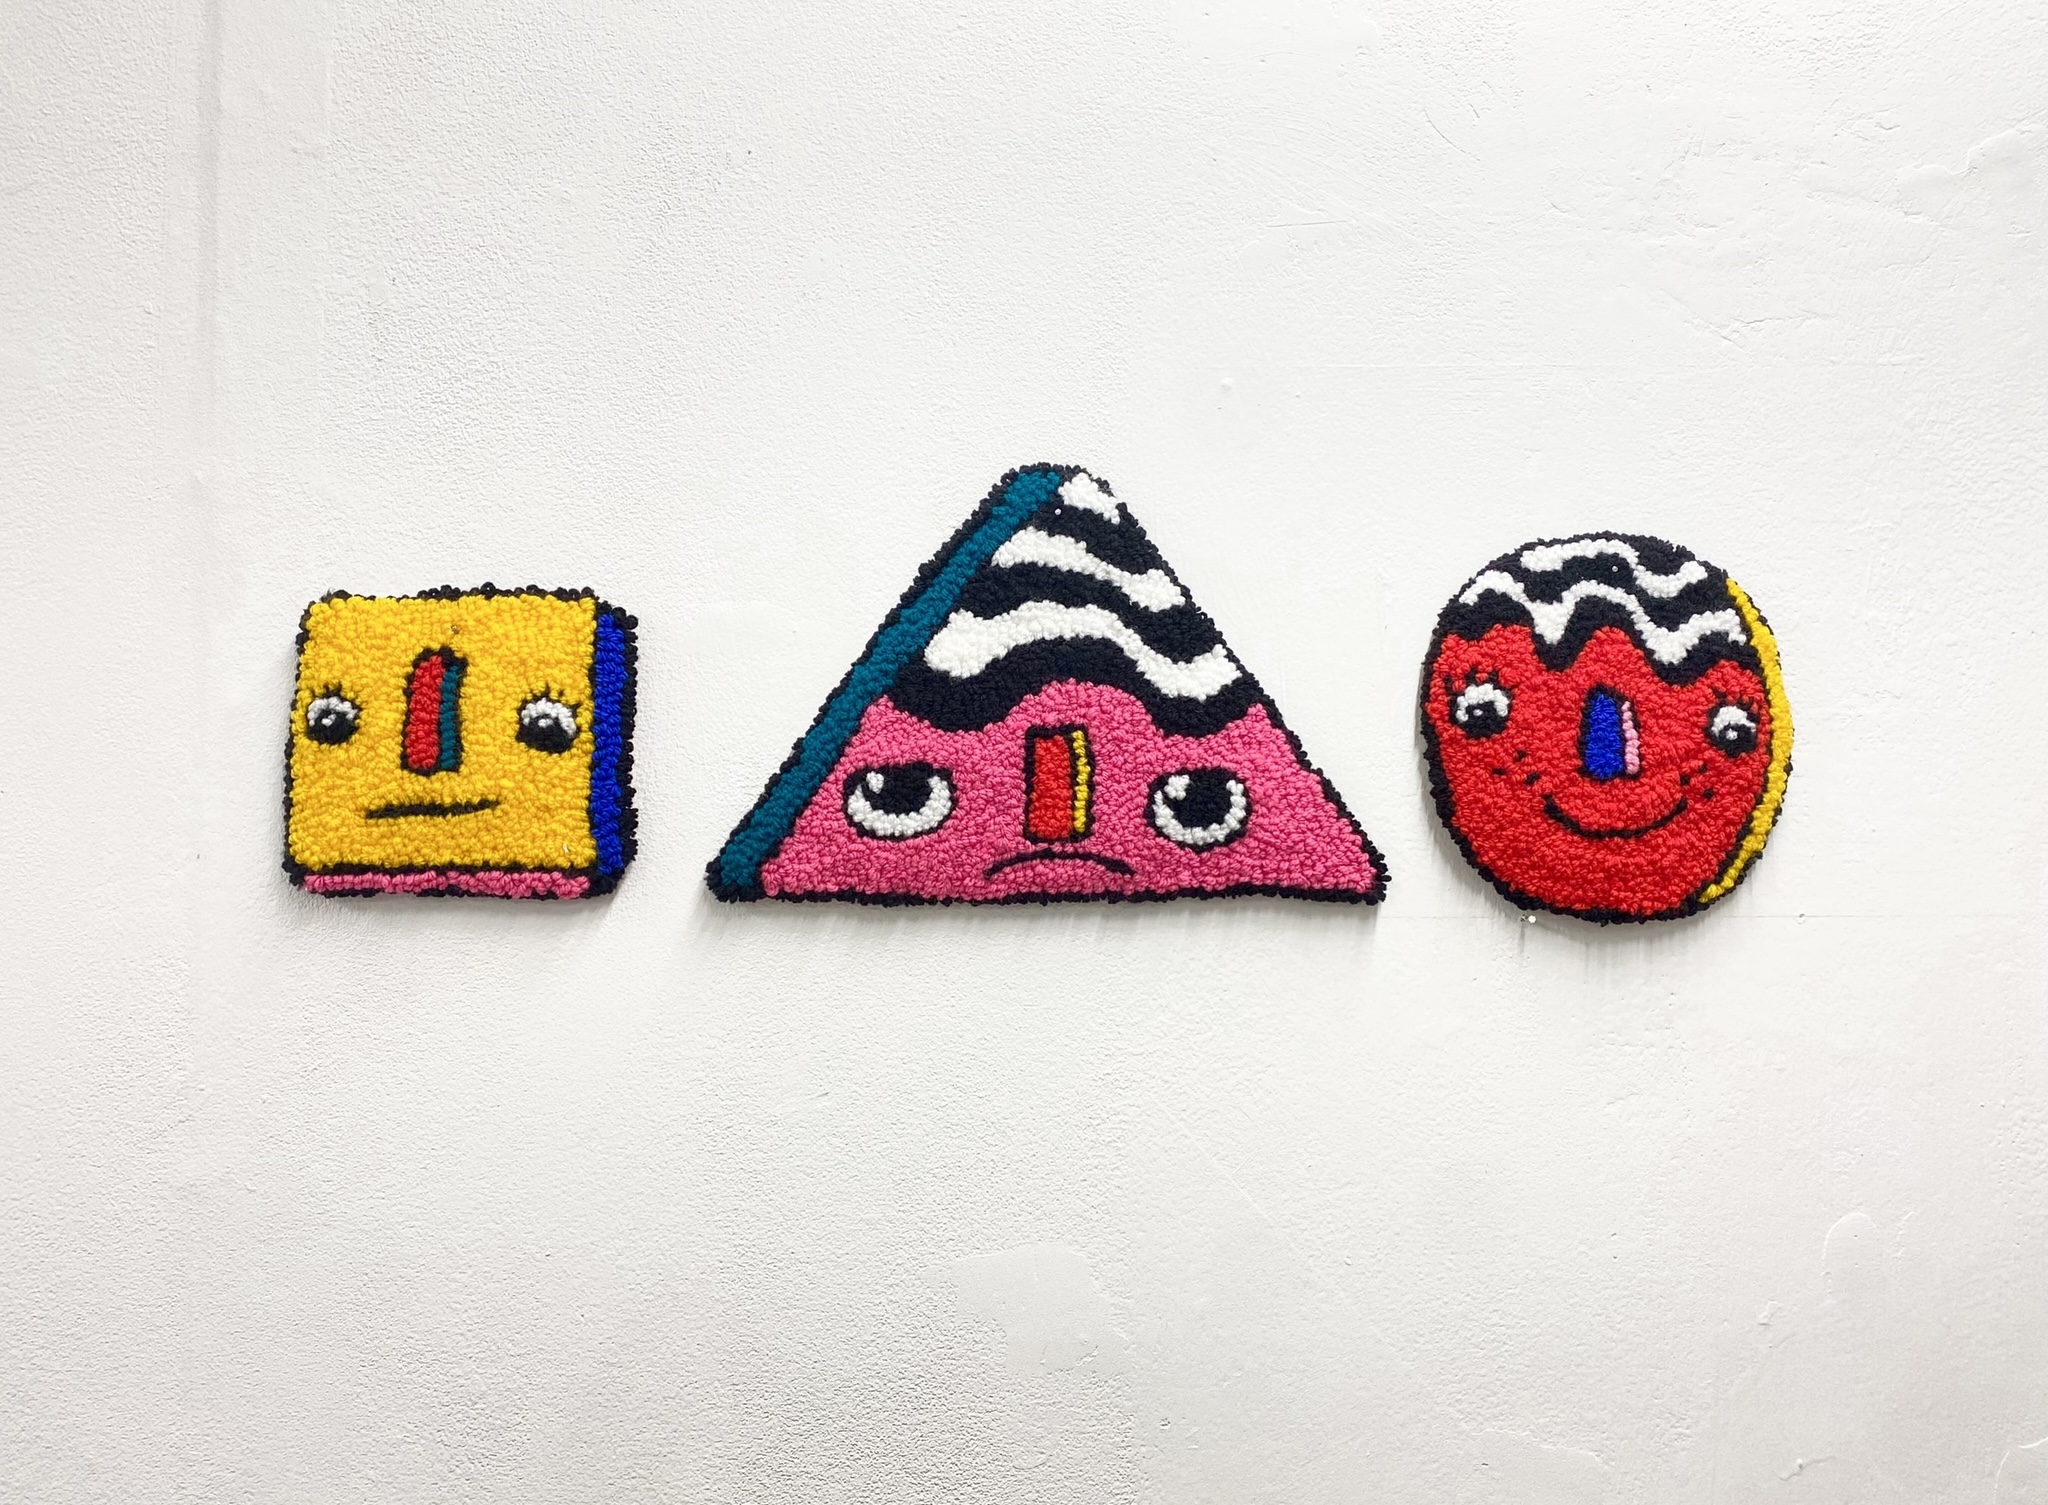 Fine Art work by Lily Bates showing a series of three brightly coloured hand tufted tapestries with faces on them